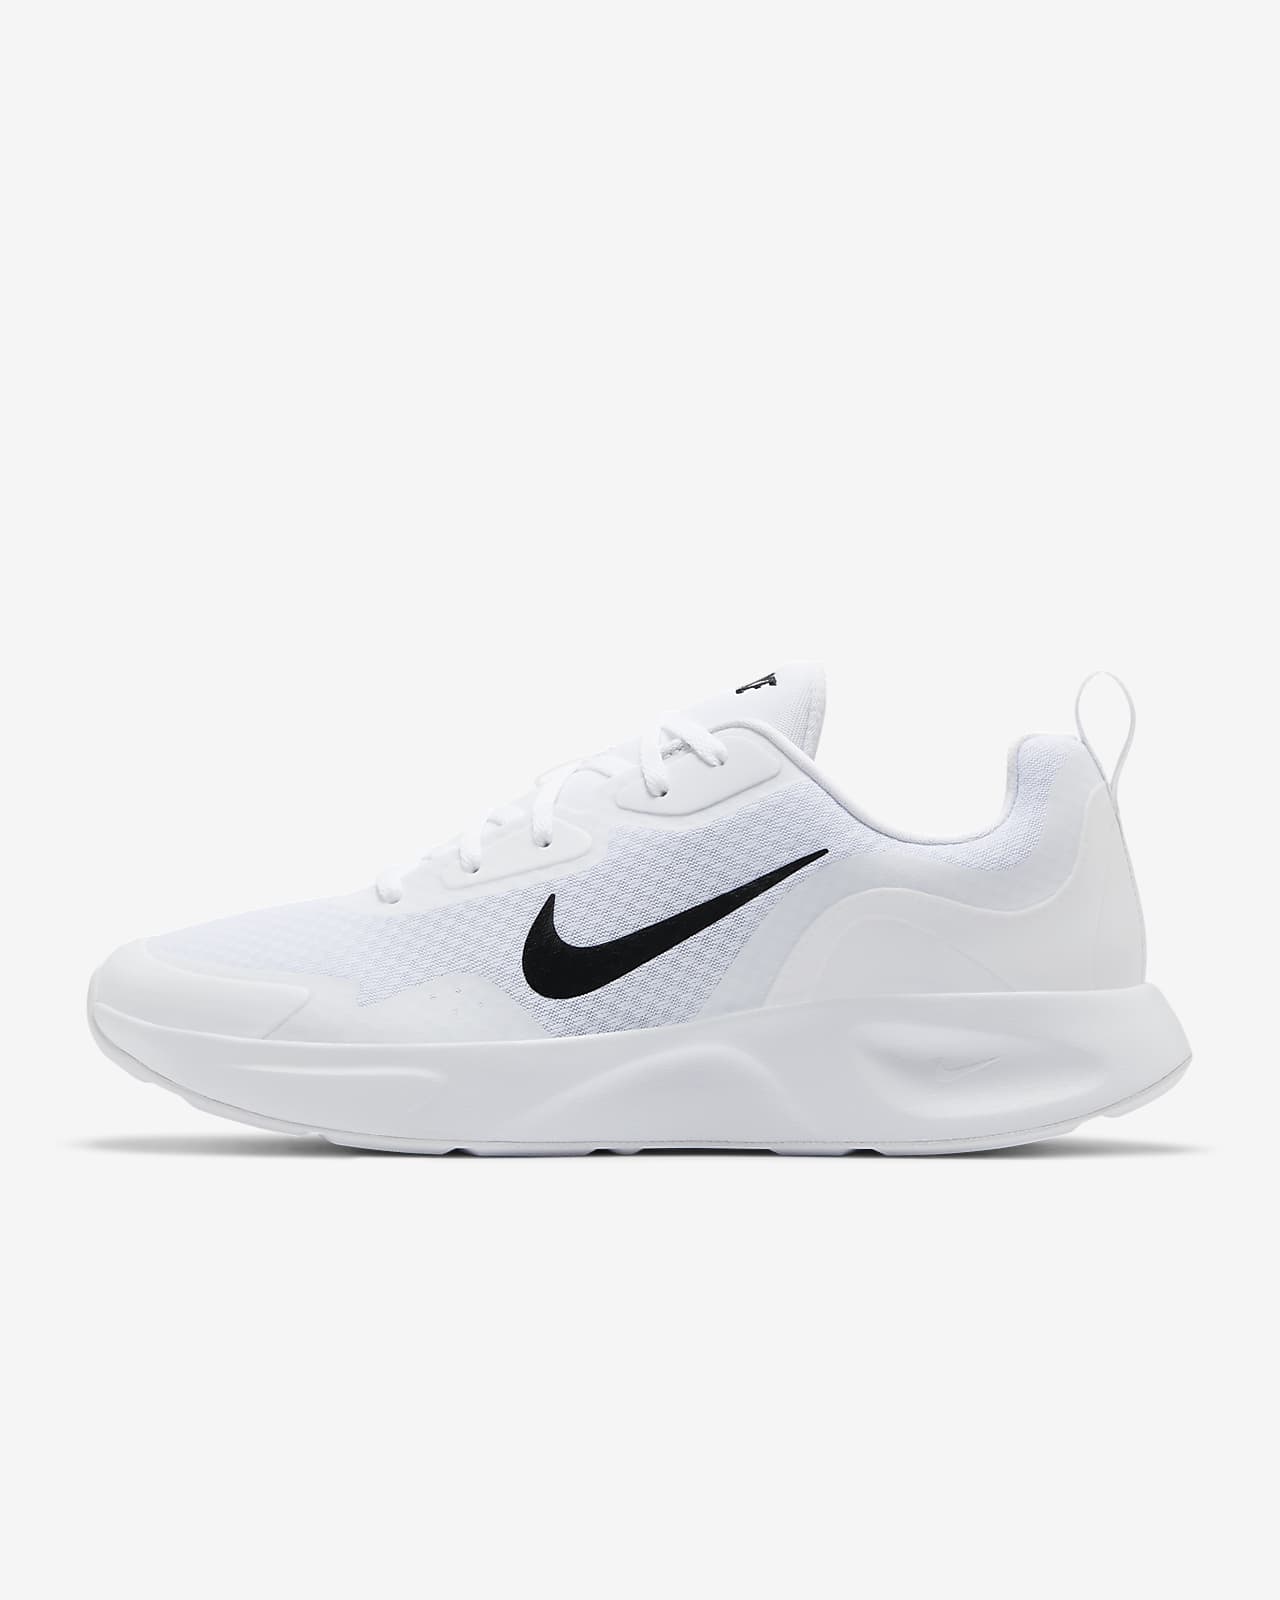 Chaussure Wearallday pour Nike FR